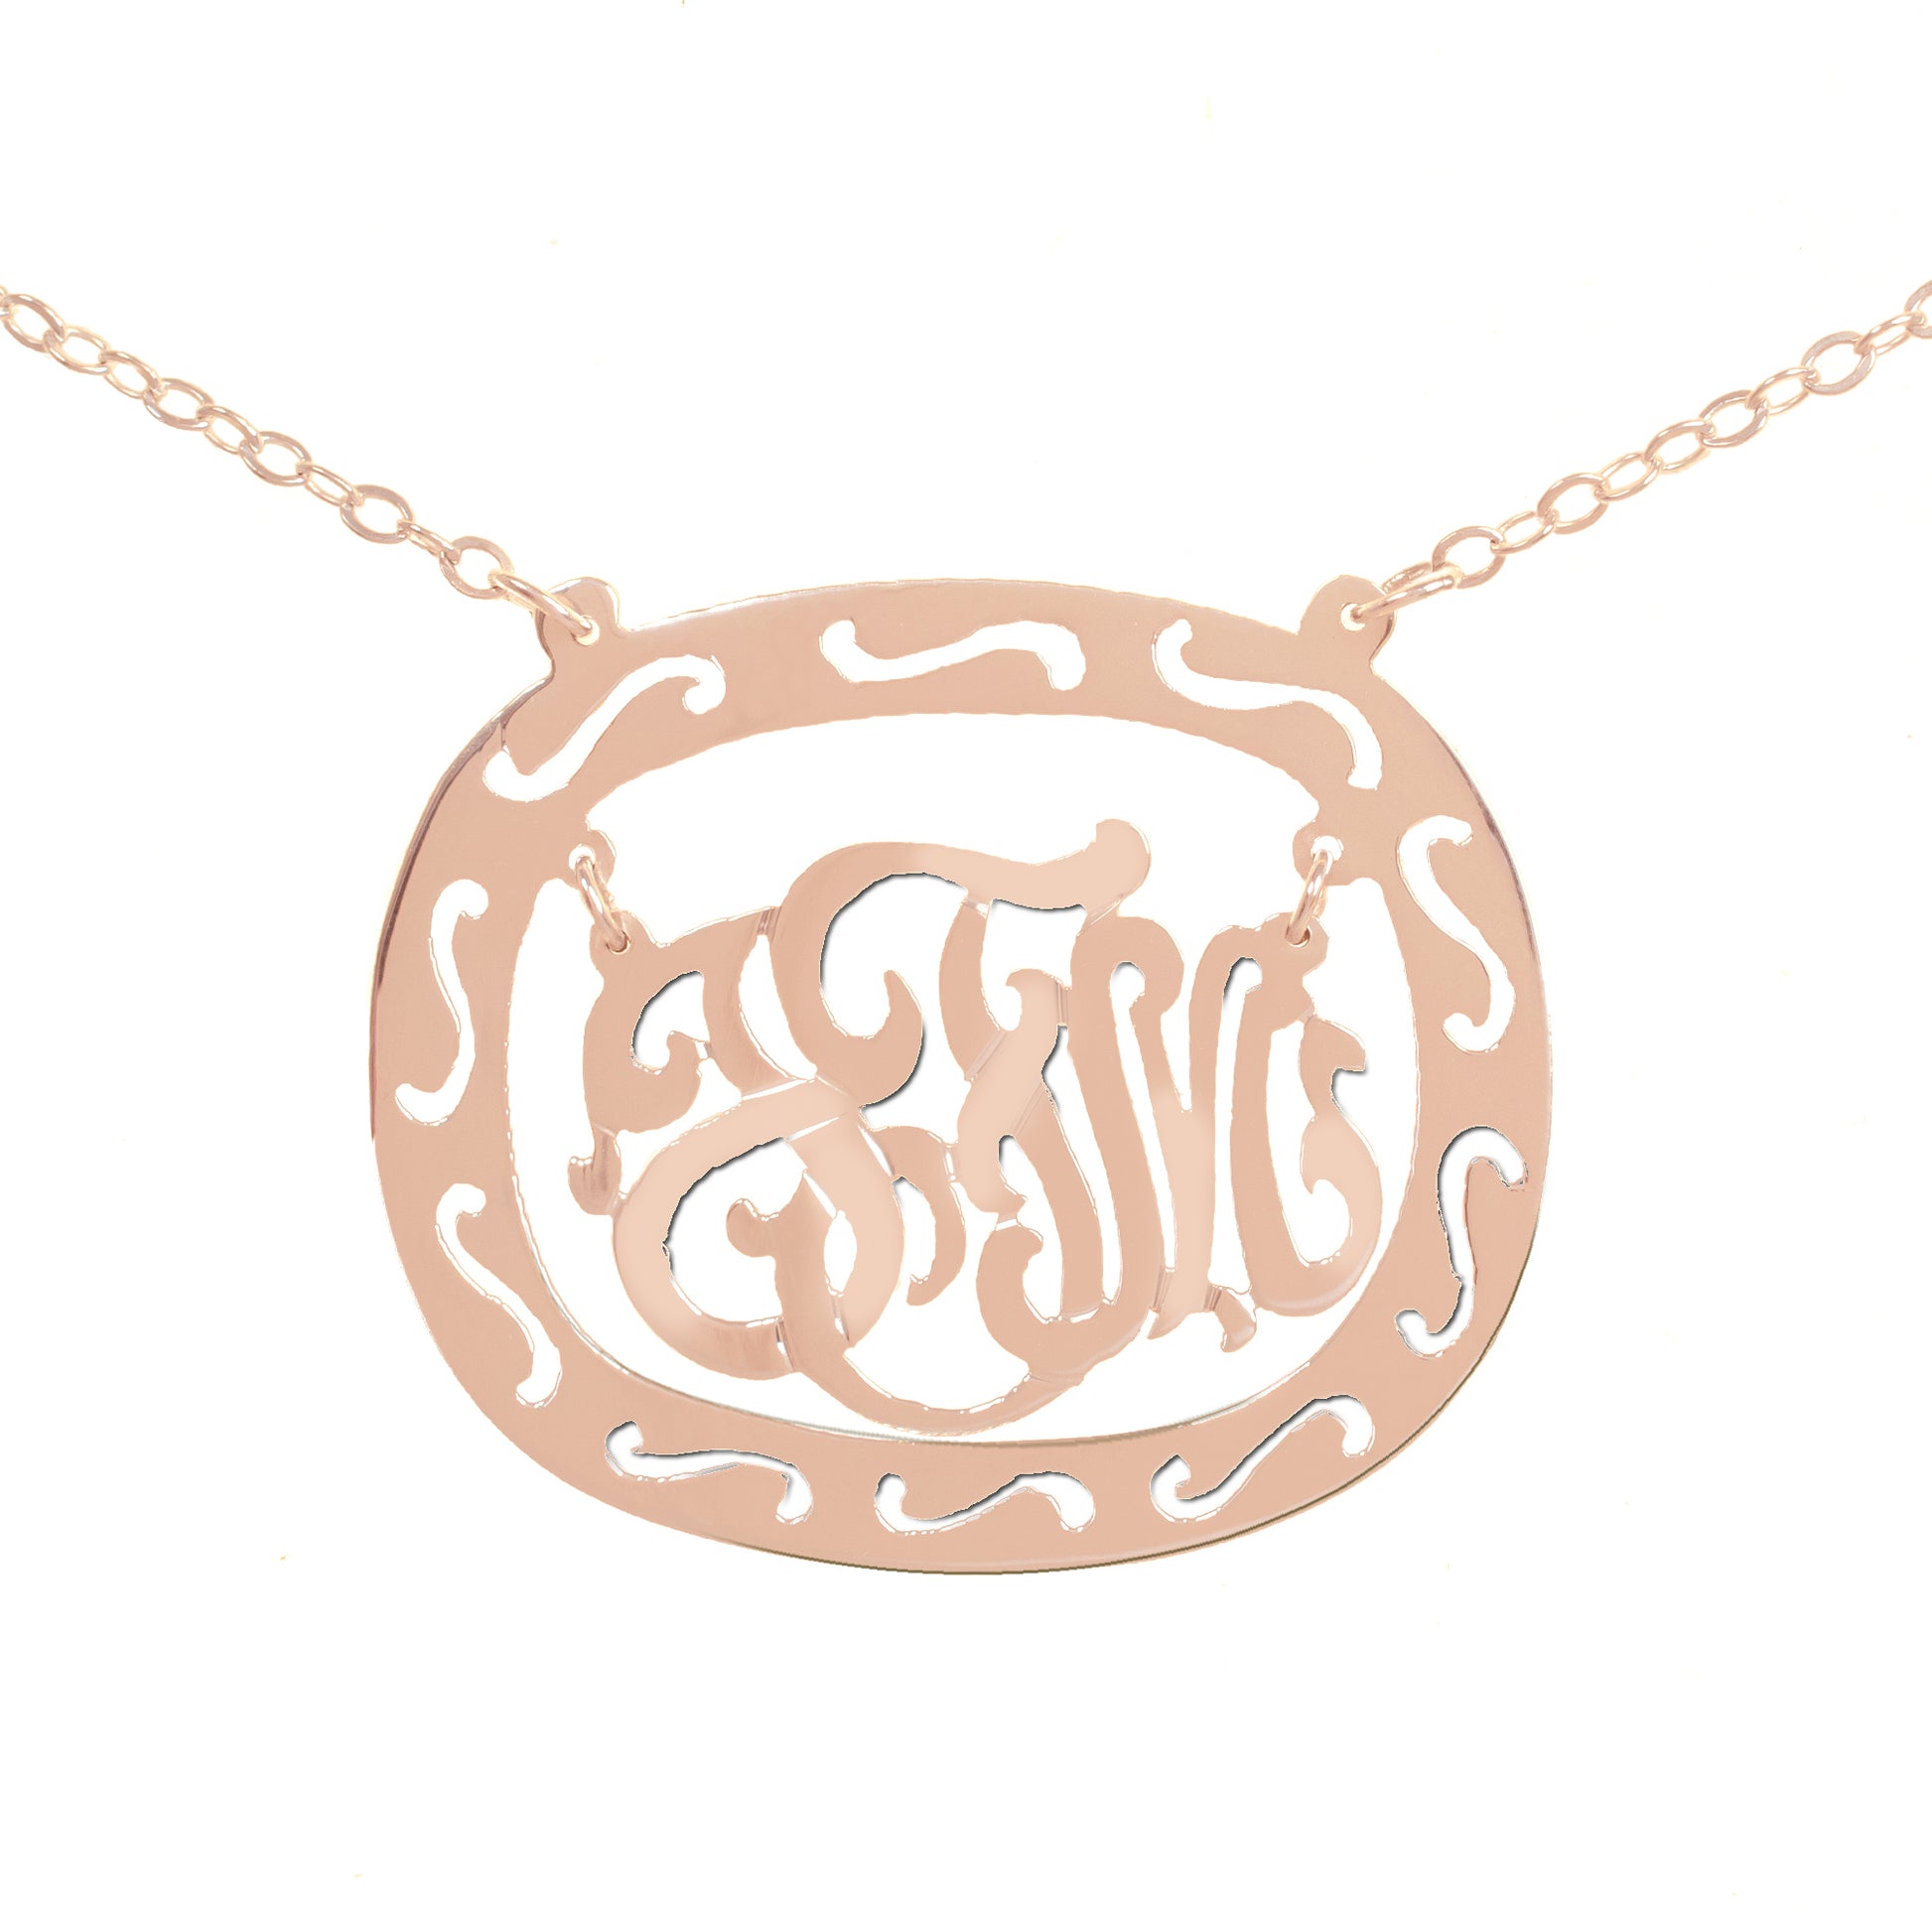 rose gold-plated silver oval monogram necklace inside thick patterned circular frame